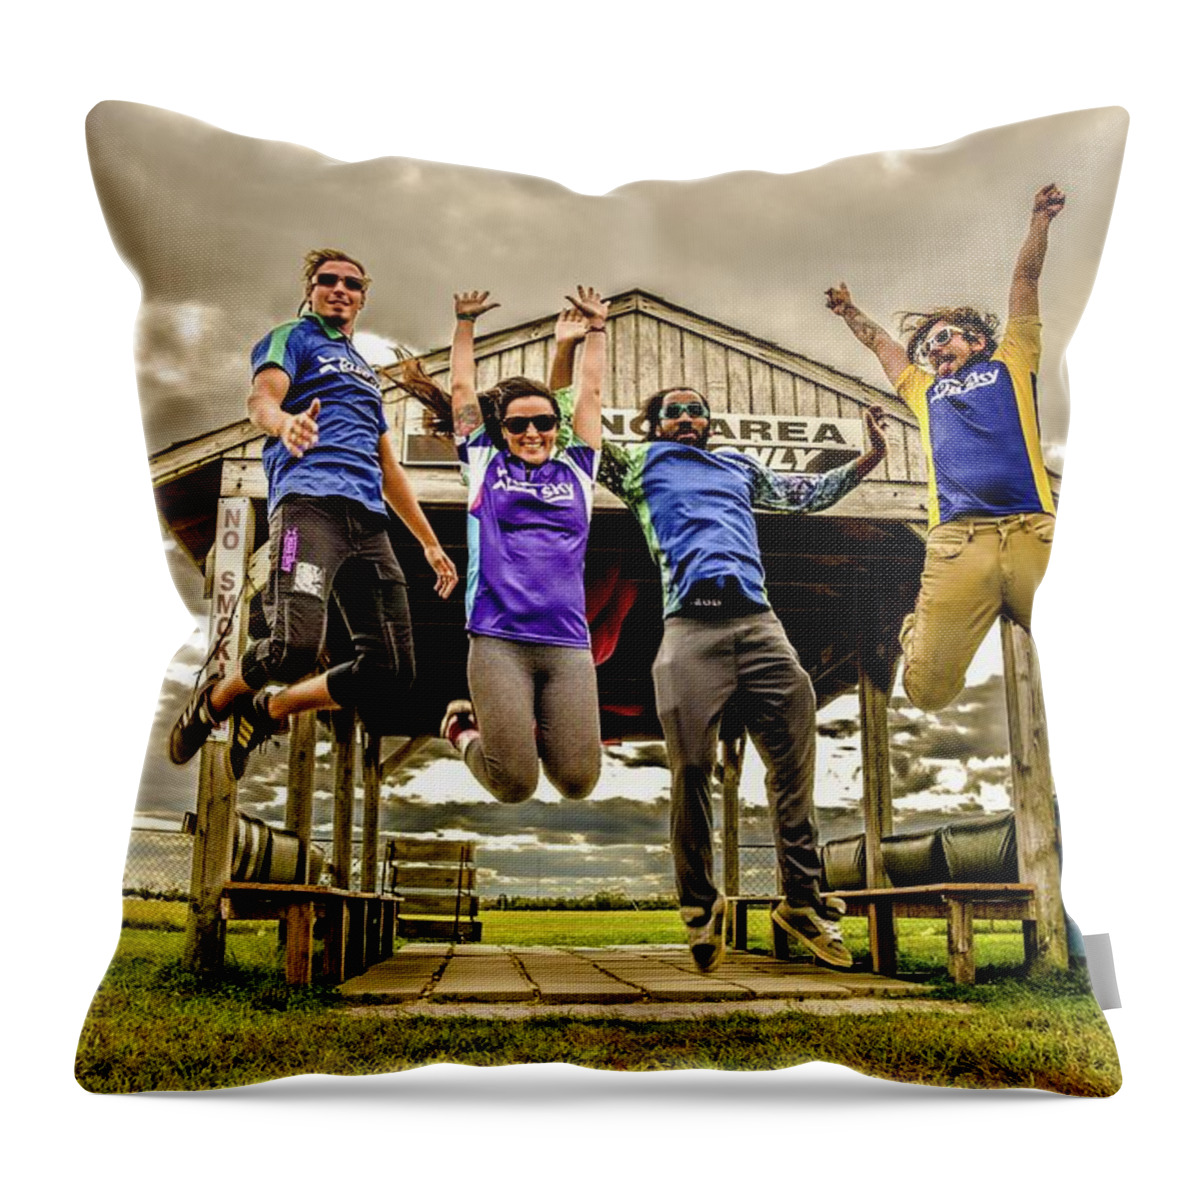 Drop Zone Throw Pillow featuring the photograph Loading Area by Larkin's Balcony Photography